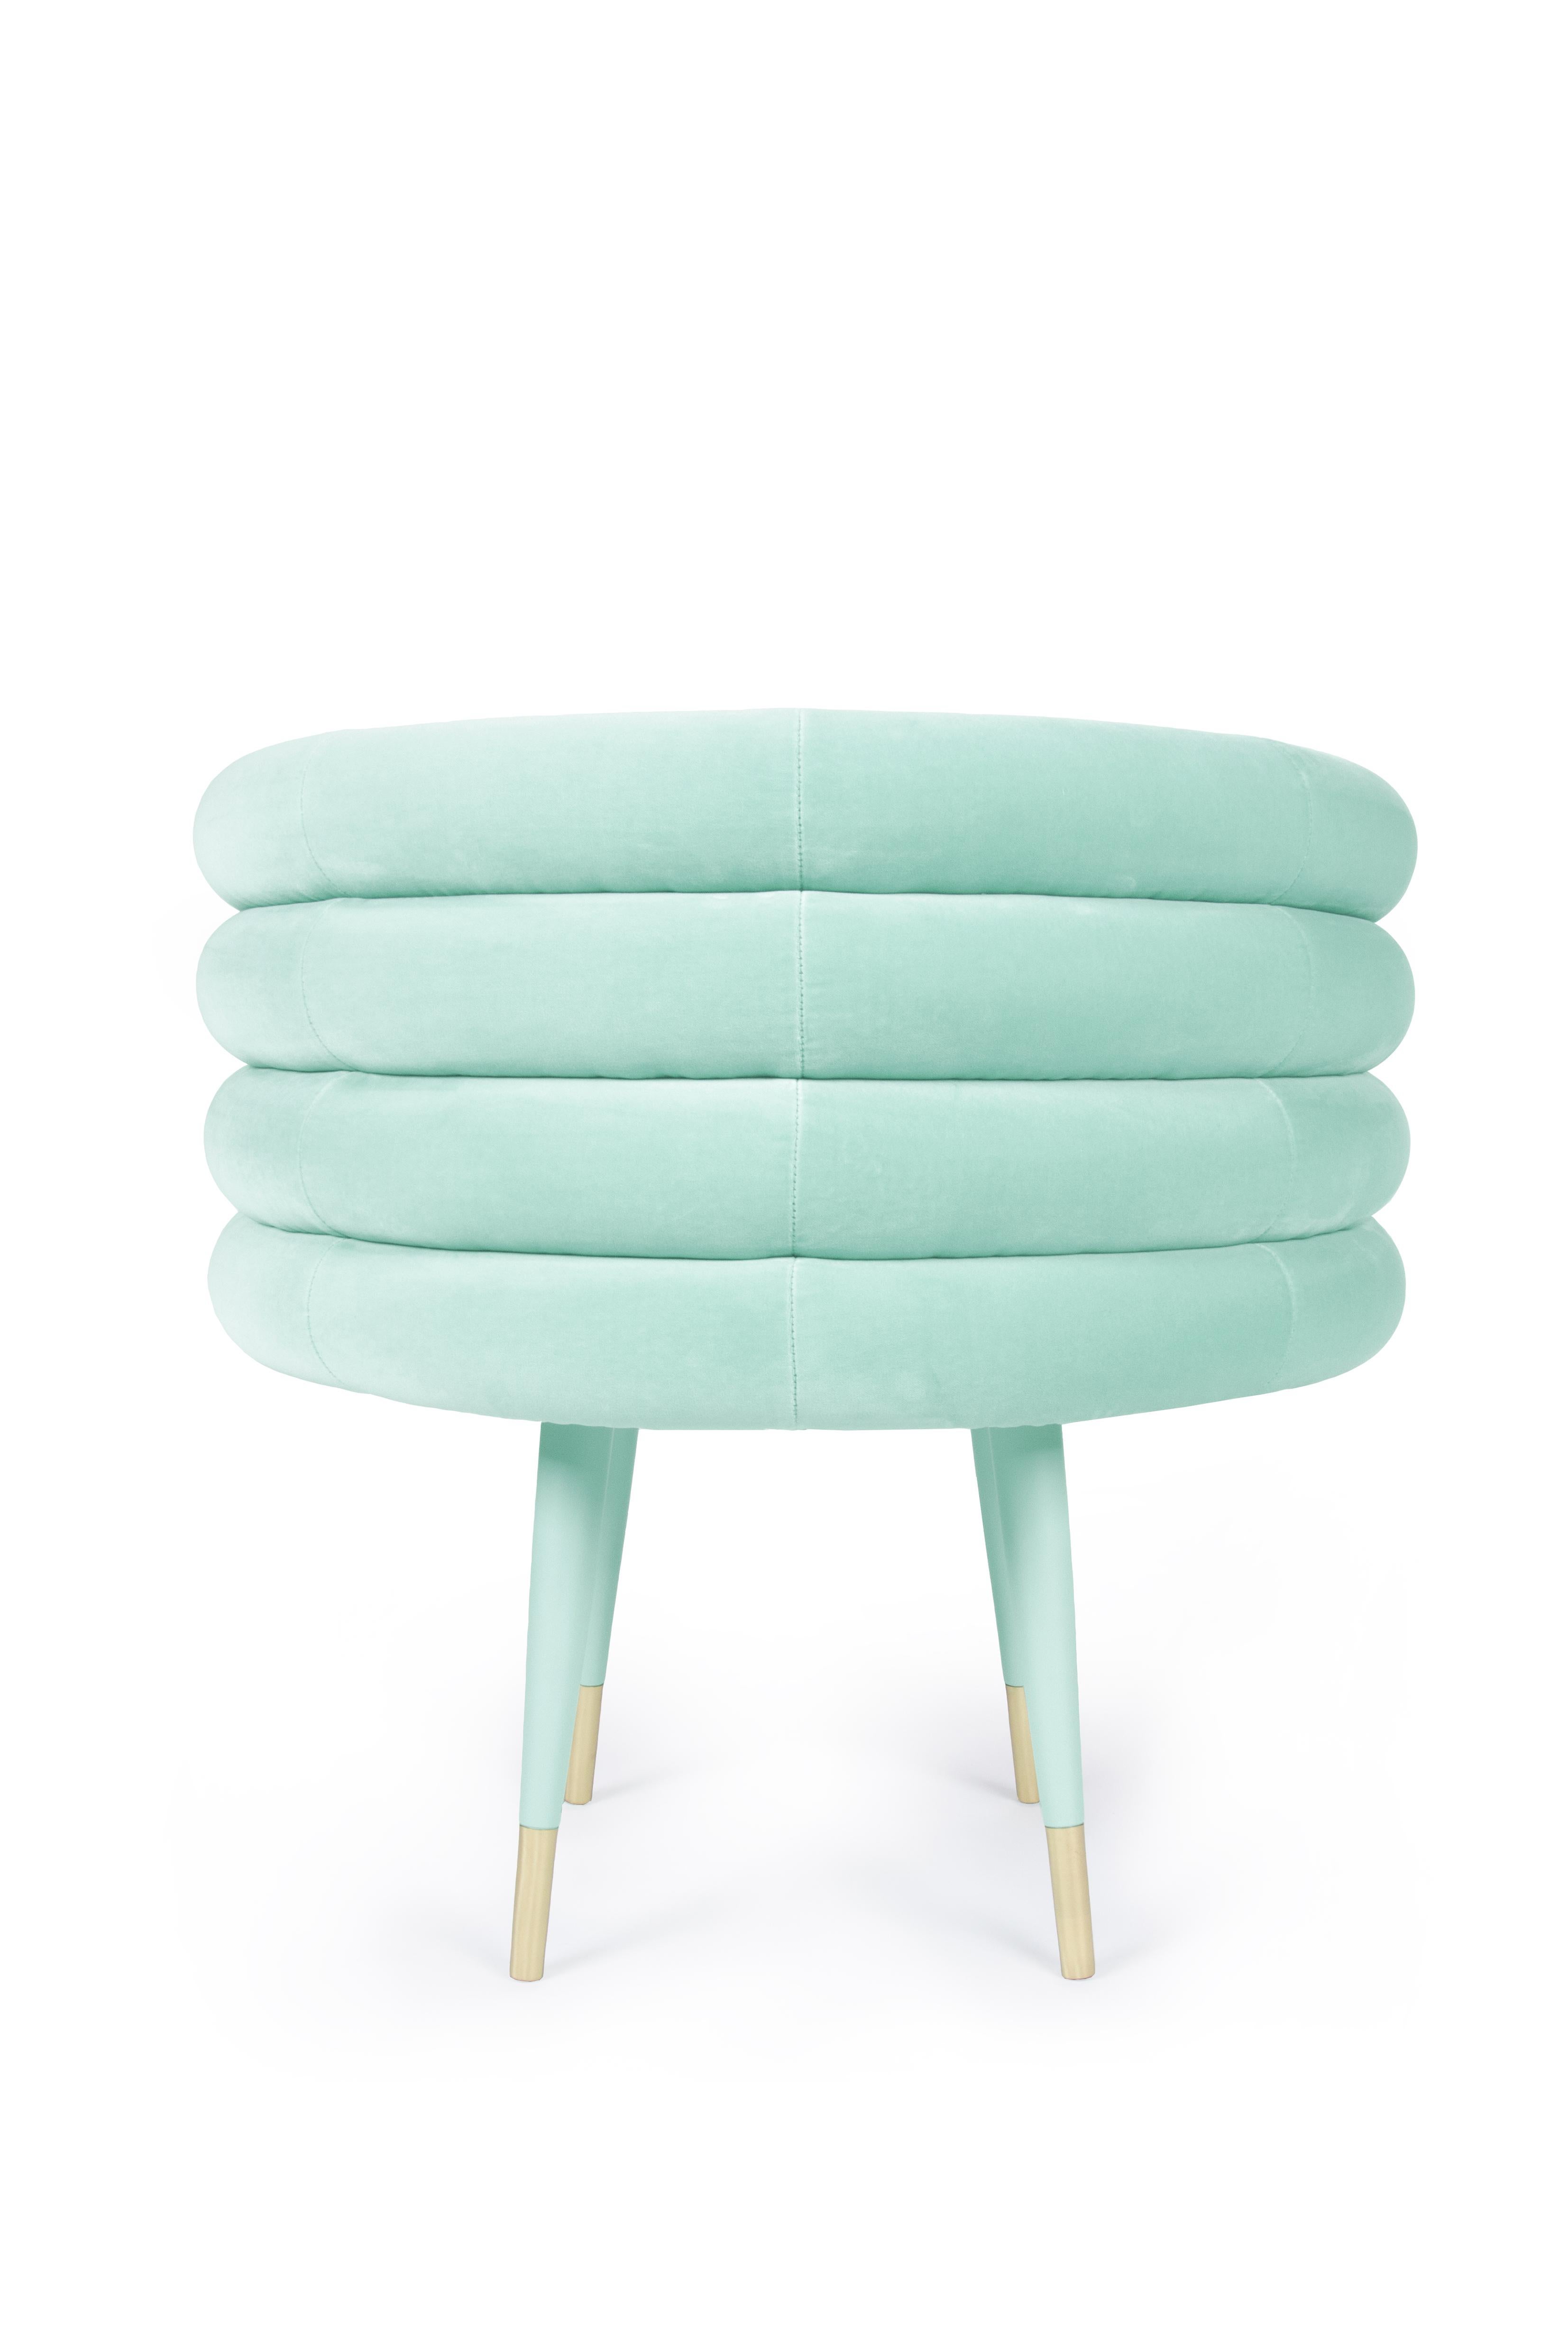 mint green chairs